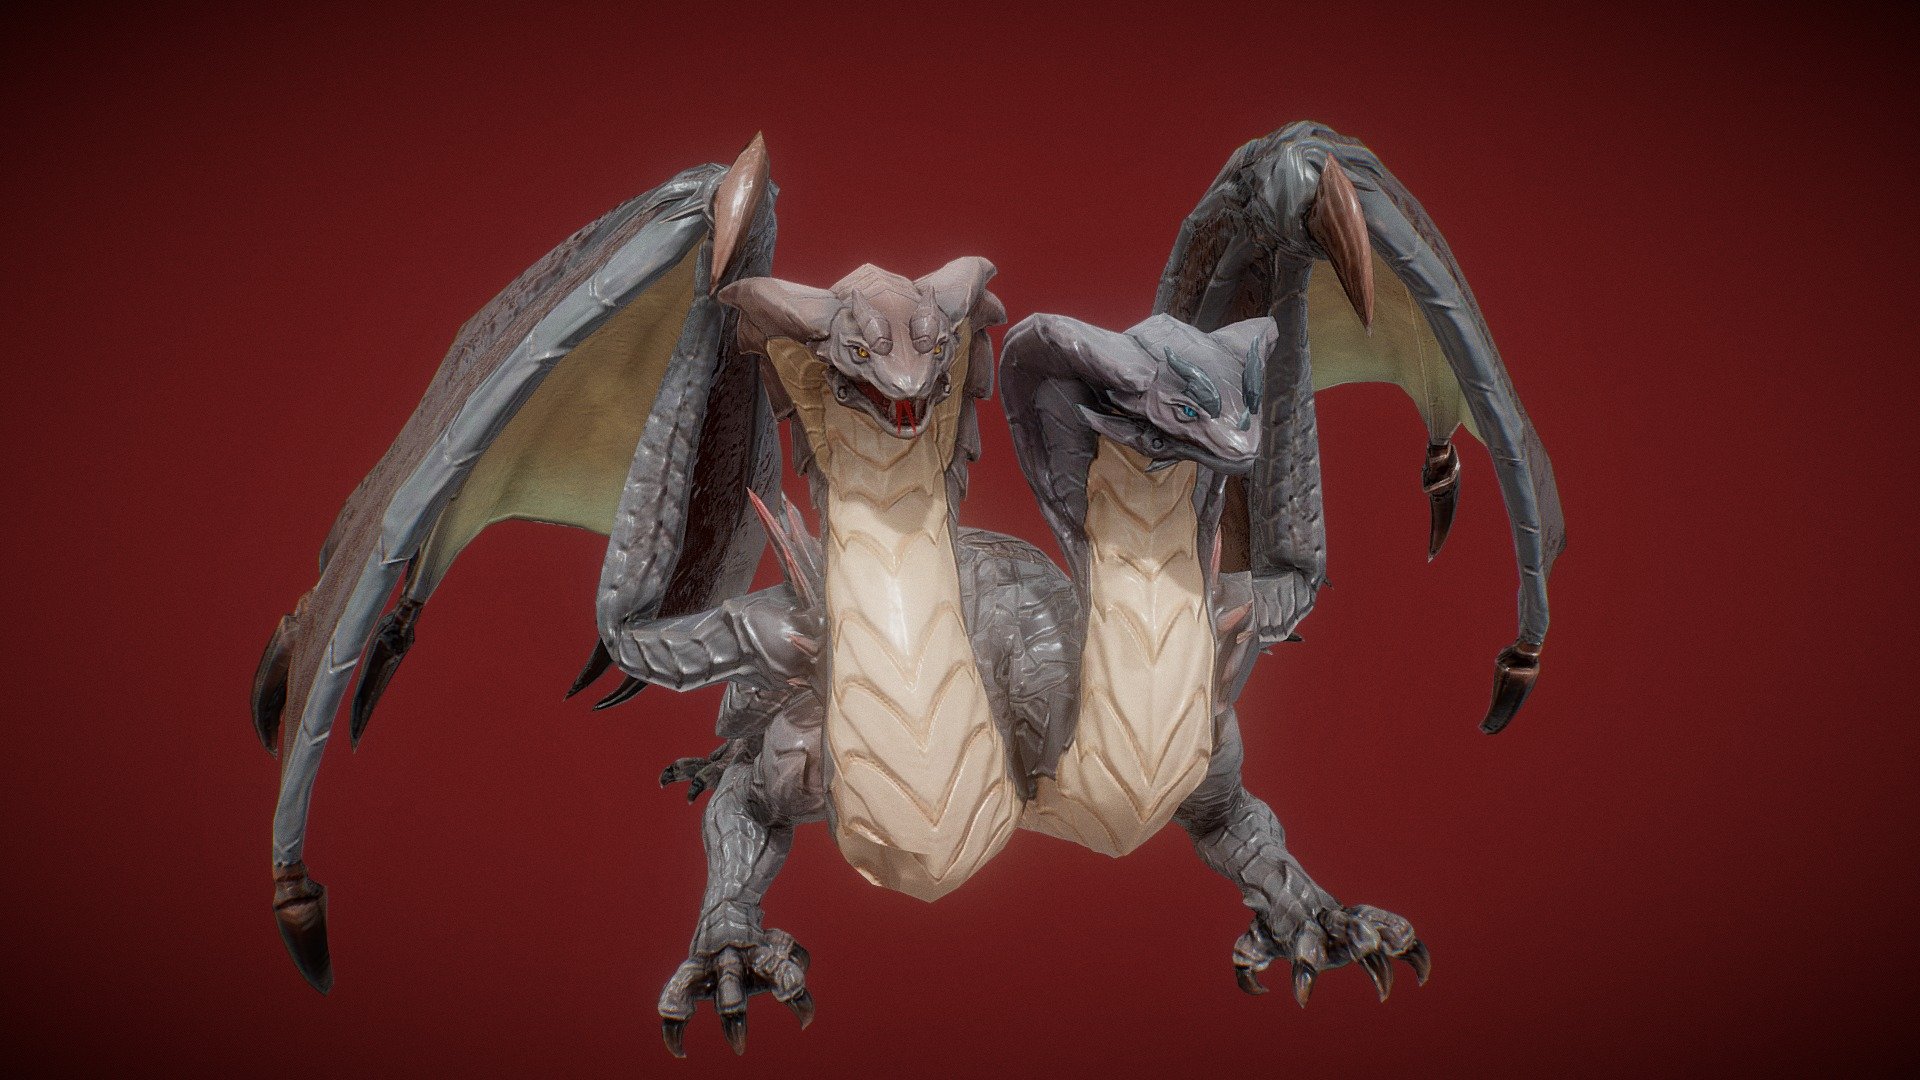 Lowpoly model fo grey giant dragon twindragon is a colossal and formidable creature with two heads, covered in thick, rugged scales of ash-grey hue. Its massive wings span wide, showcasing intricate patterns resembling storm clouds. texture and material, Blender, Substance Painter.Use it for your incredible games - Twindragon - Buy Royalty Free 3D model by Luna (@StudioLuna) 3d model